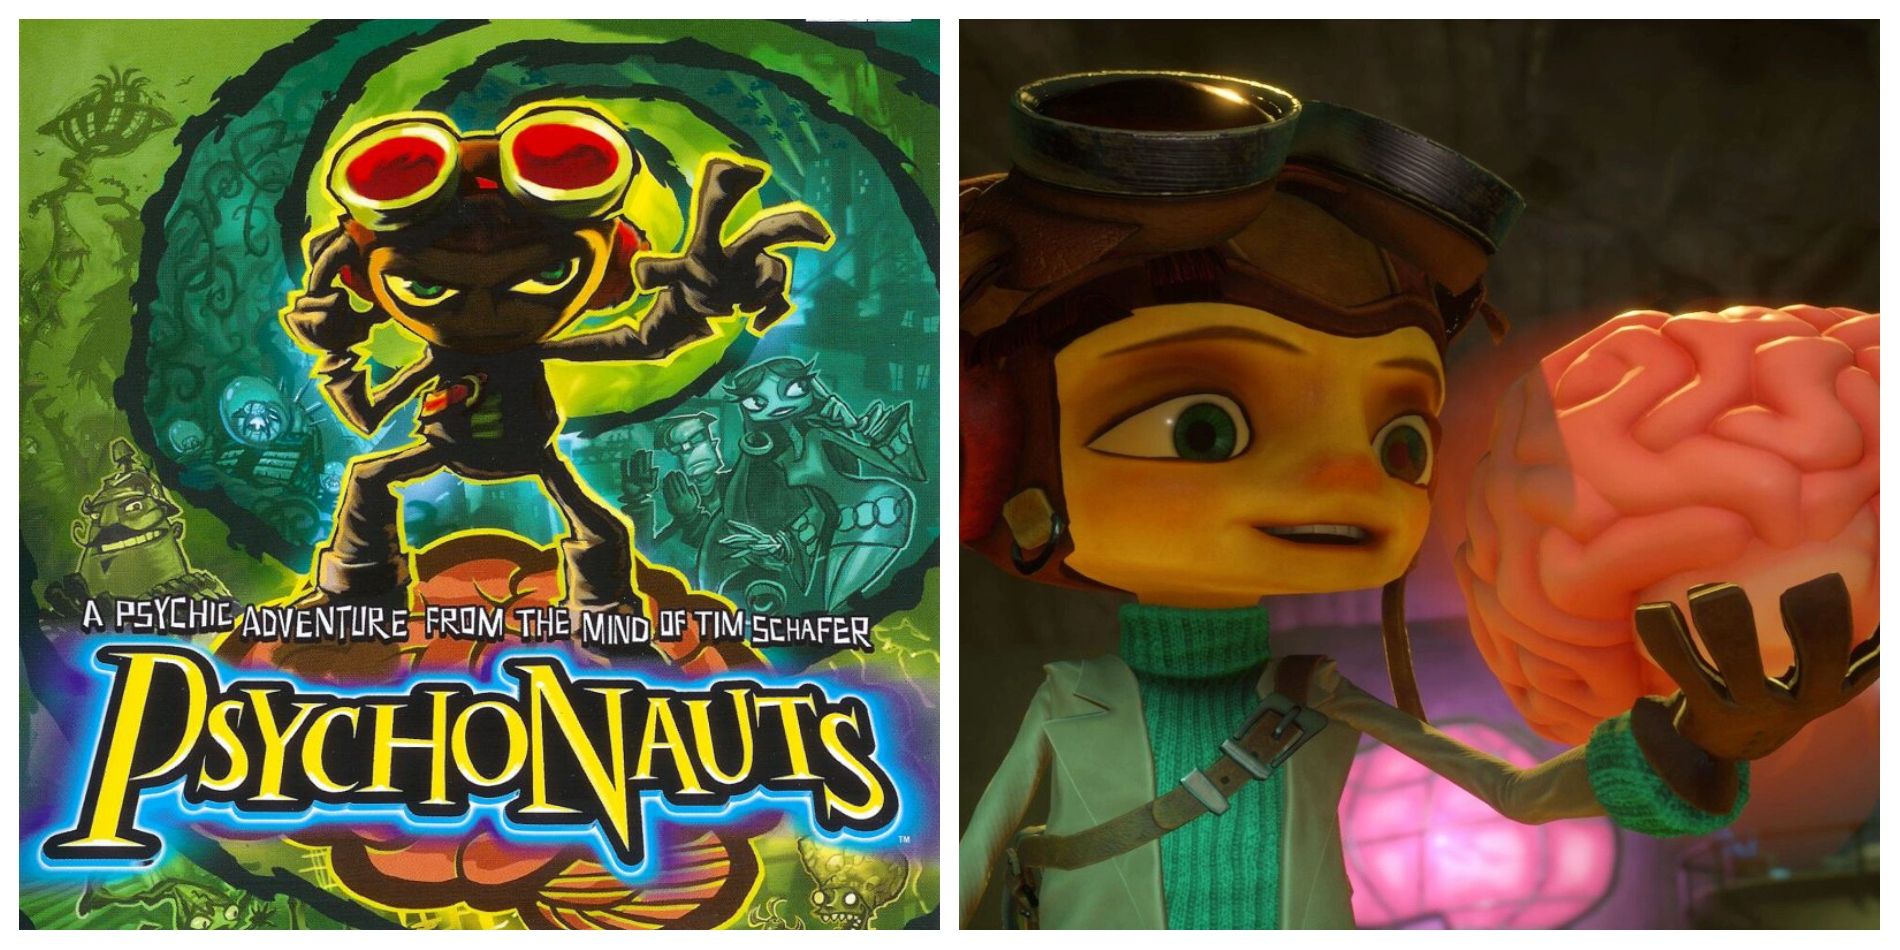 Psychonauts 2 Shows That The Best Sequels Are Never Too Late - Psychonauts and Psychonauts 2